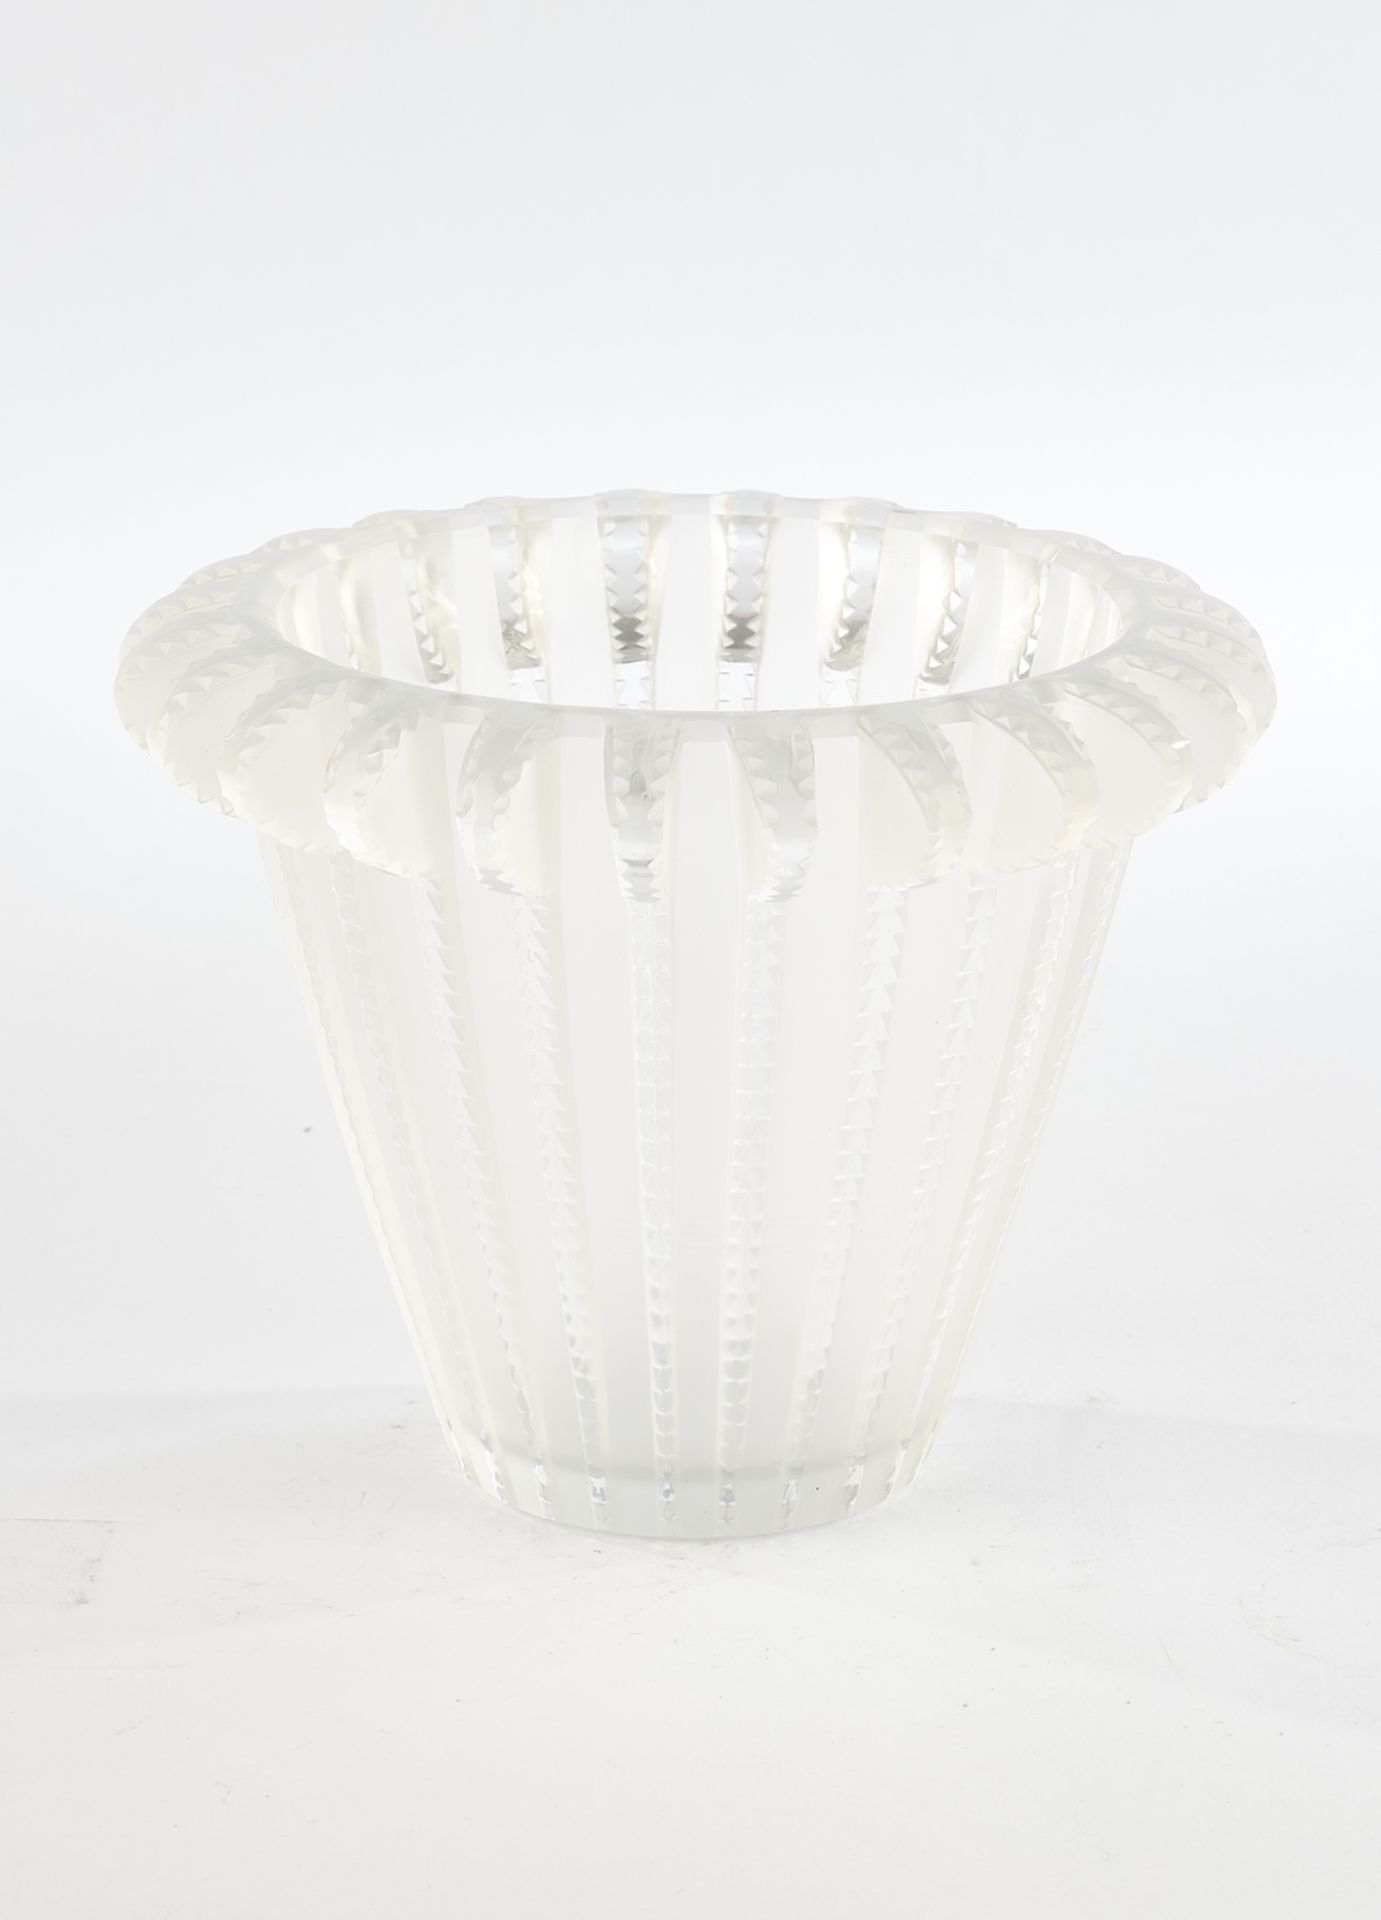 Vase, , "Royat", Lalique, colourless glass, partly frosted, conical, vertically ribbed body, marked